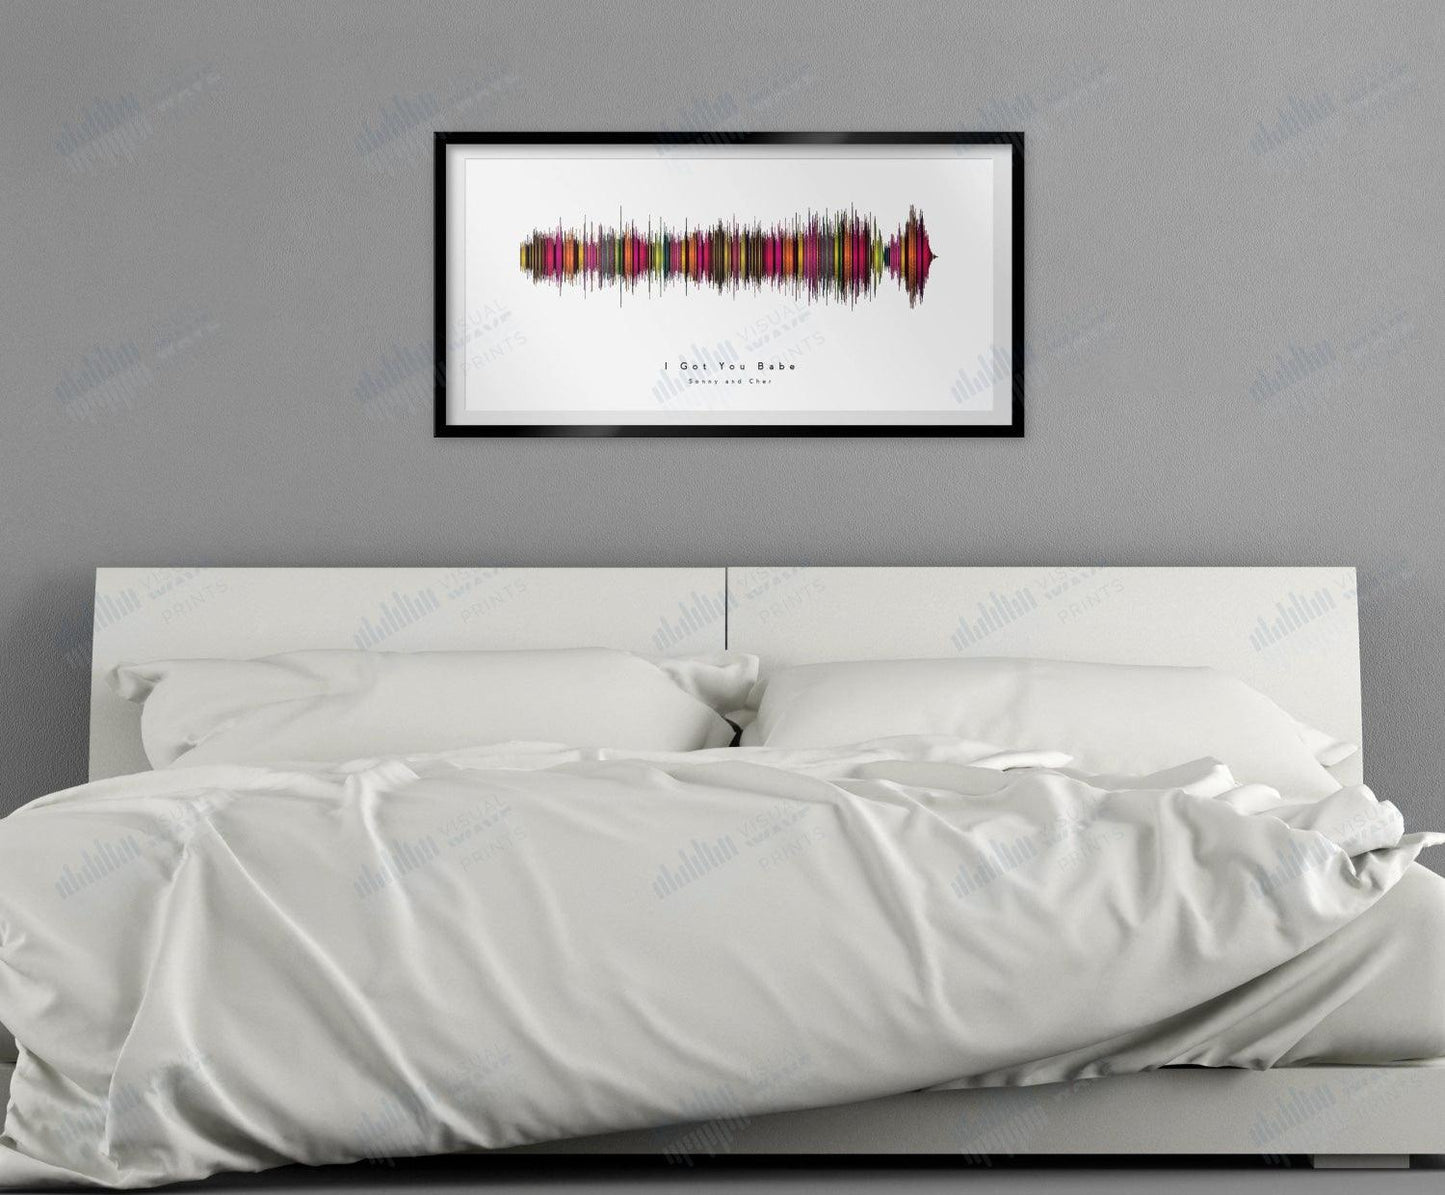 I Got You Babe by Sonny and Cher - Visual Wave Prints